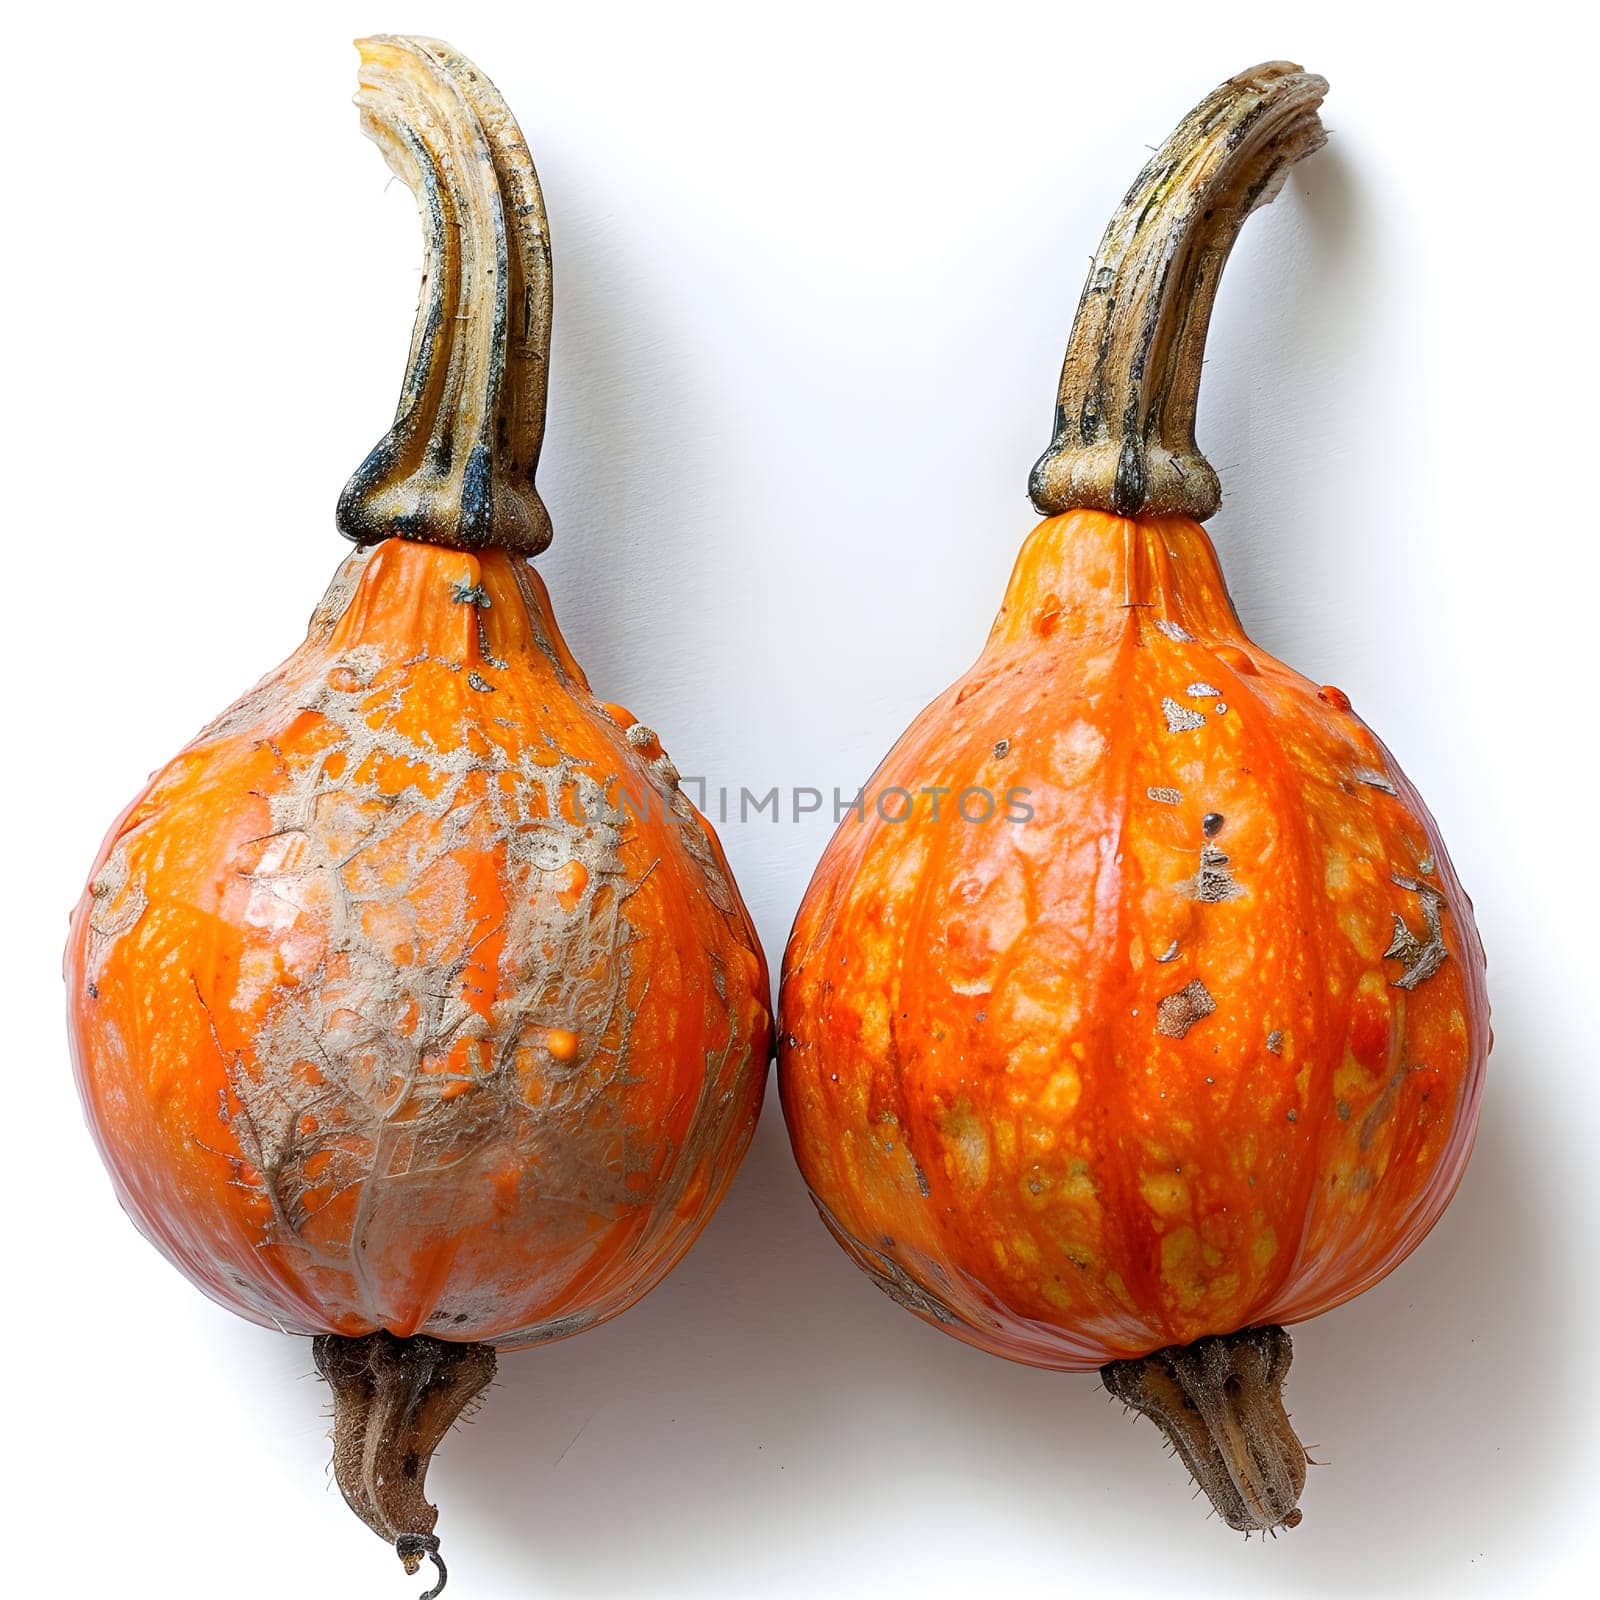 Two orange calabaza pumpkins displayed on white surface by Nadtochiy